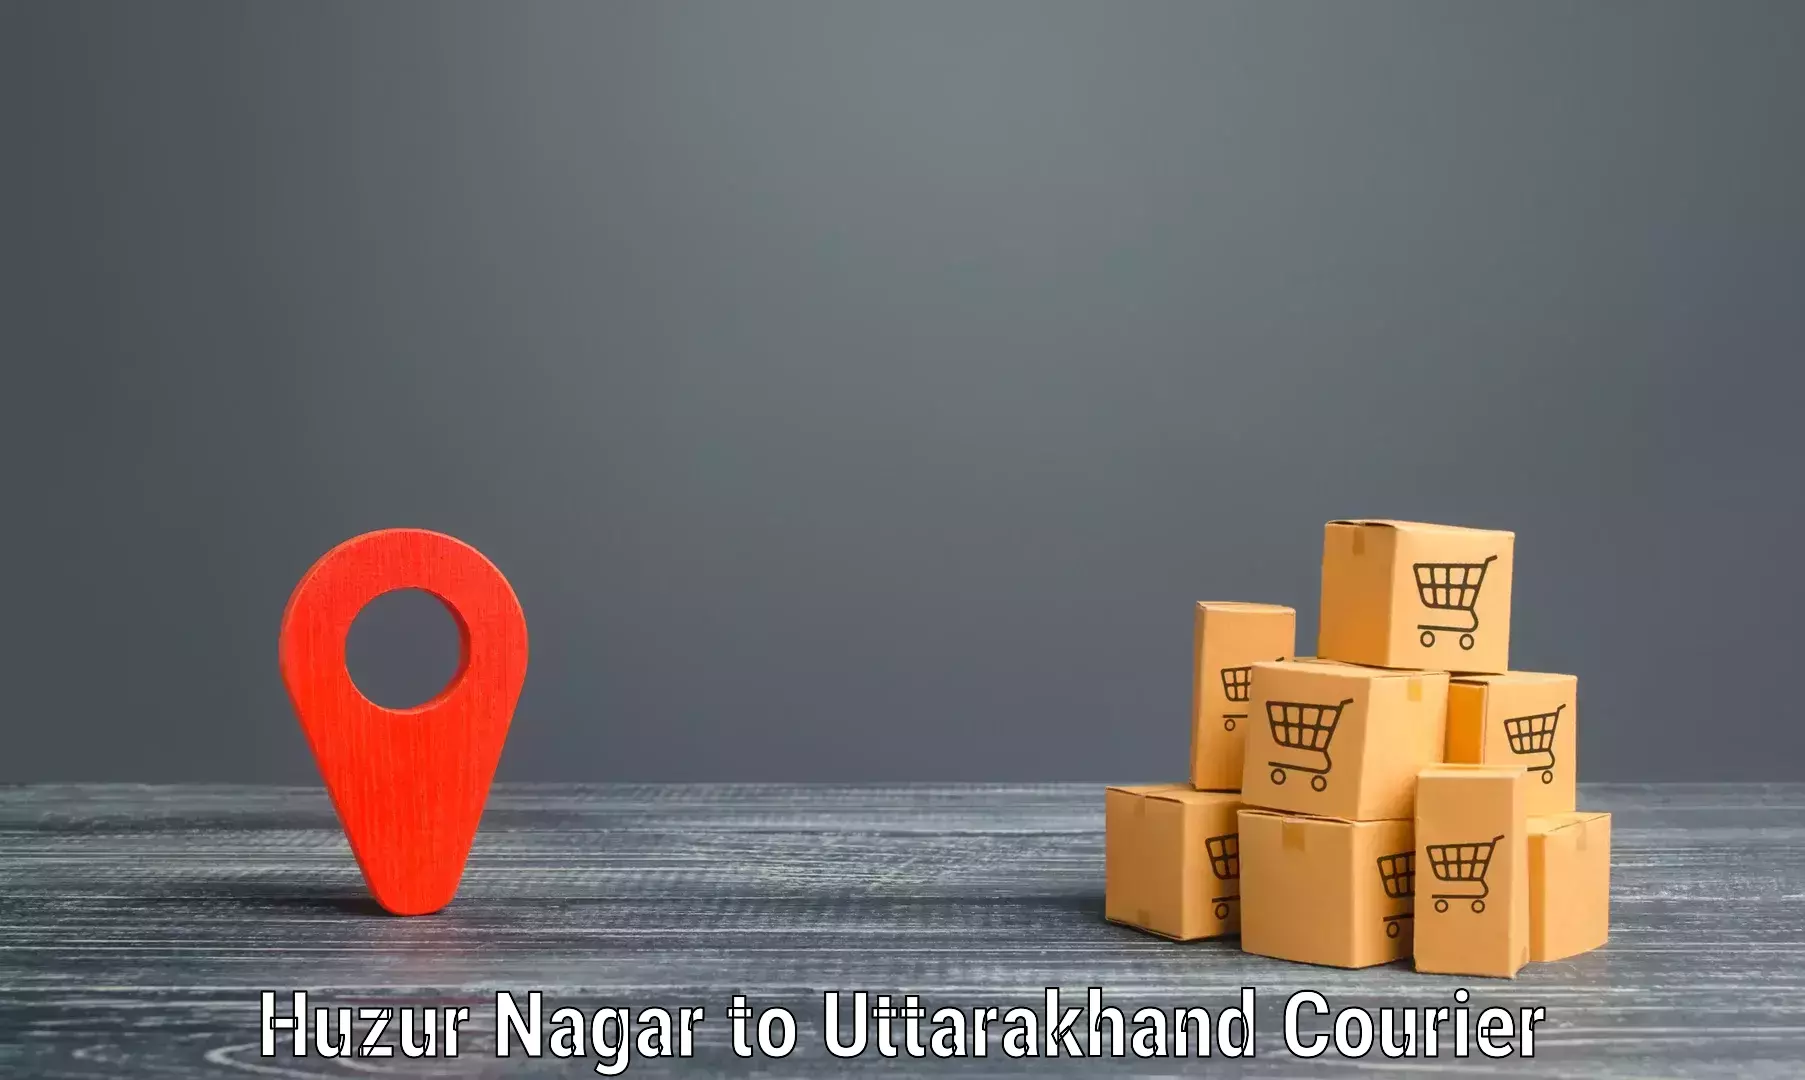 Express delivery capabilities Huzur Nagar to Roorkee